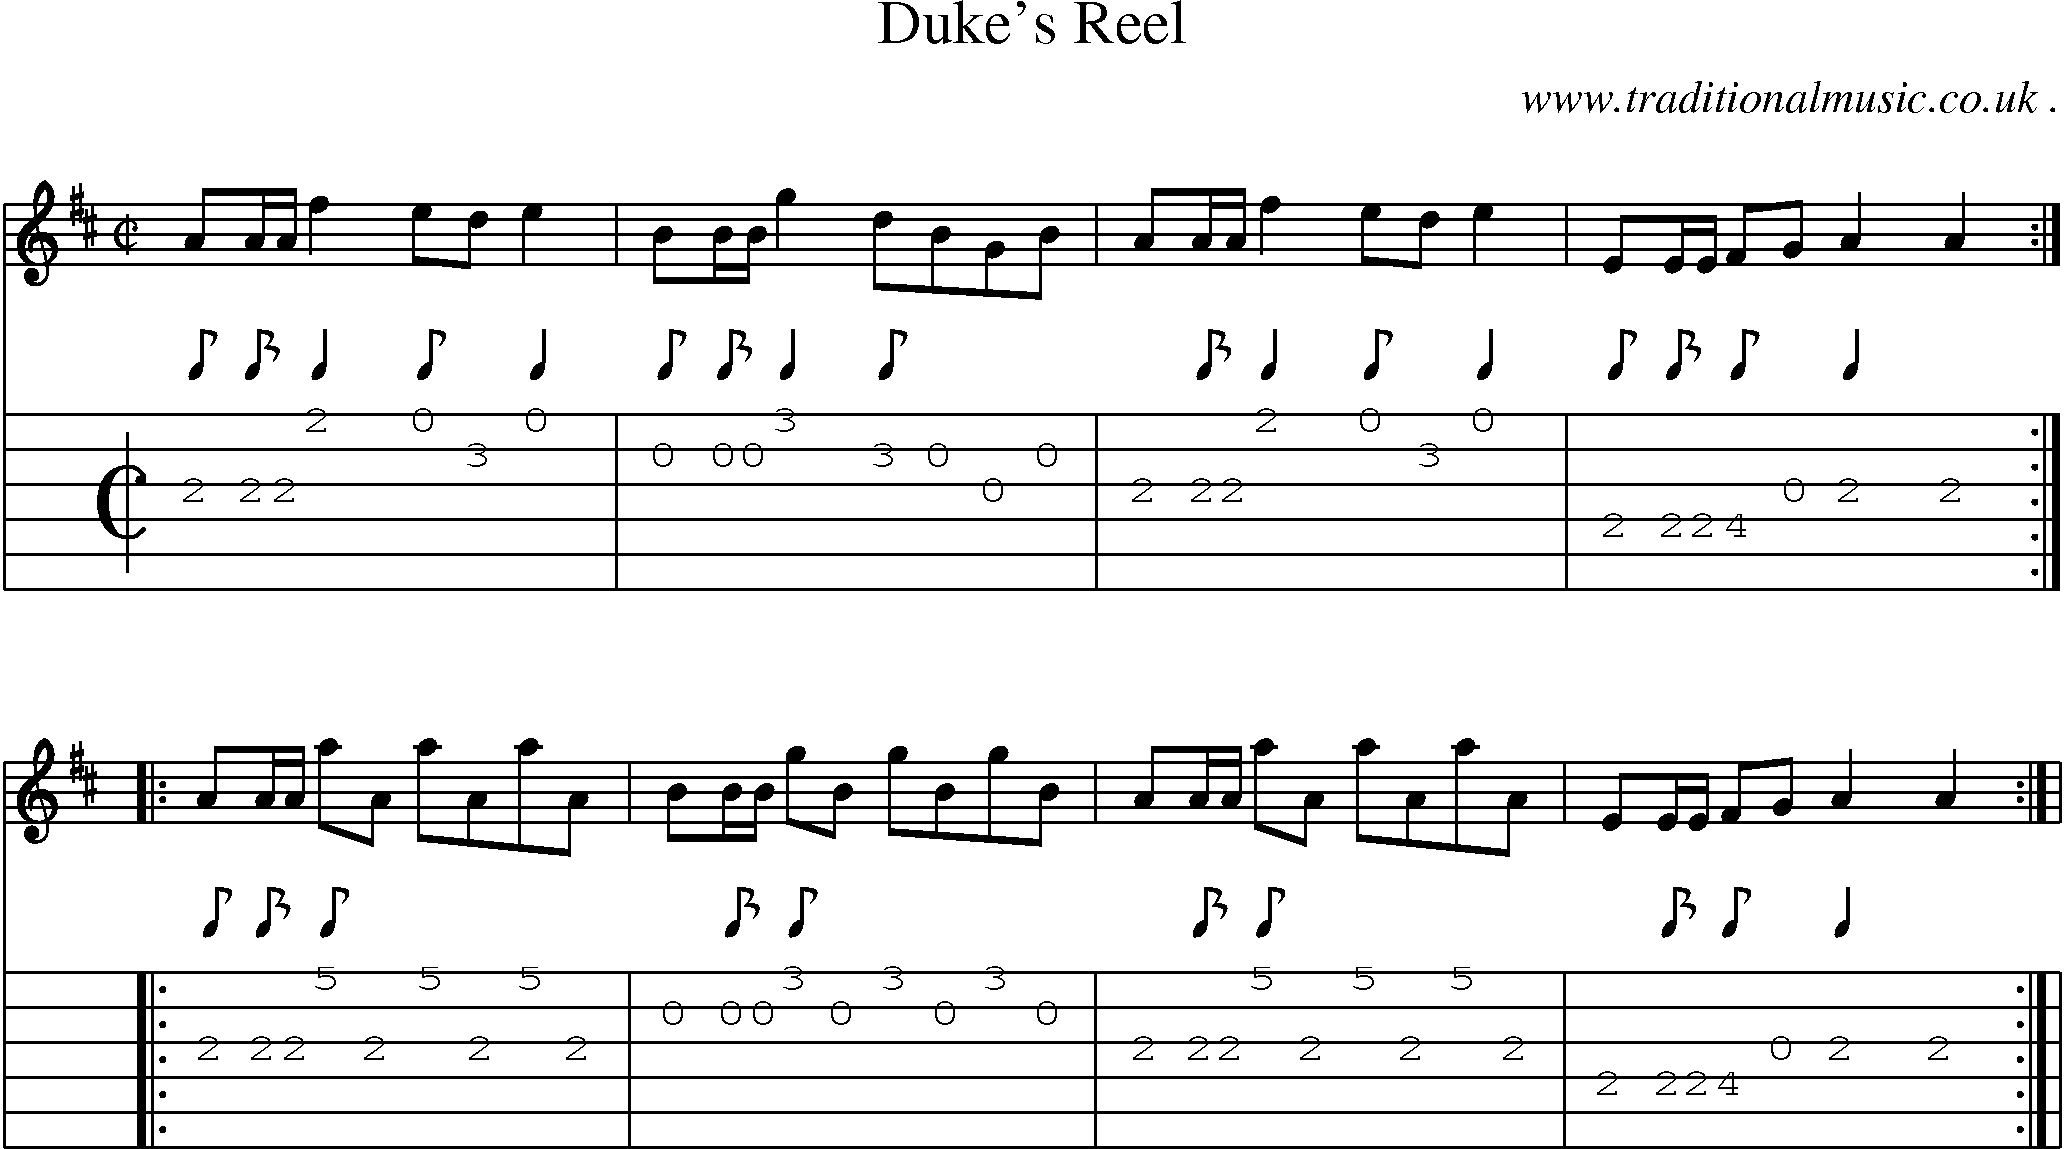 Sheet-Music and Guitar Tabs for Dukes Reel